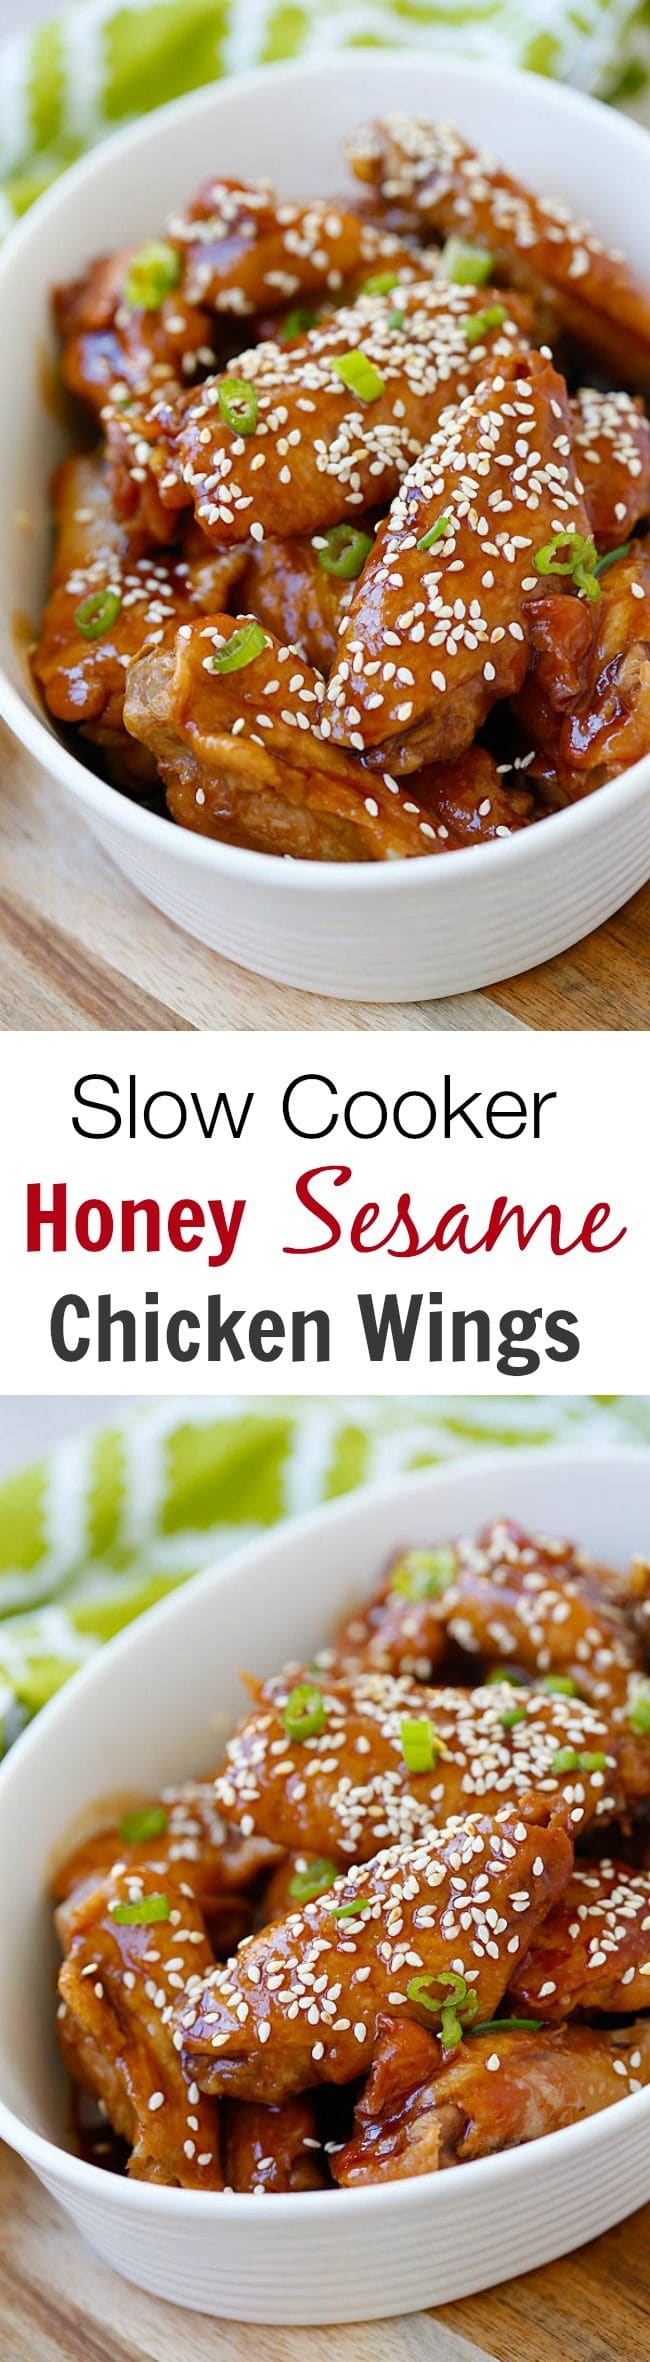 Slow Cooker Honey Sesame Chicken Wings – crazy delicious chicken wings in a sticky savory honey sesame sauce. 10 mins prep time & dinner is ready! | rasamalaysia.com